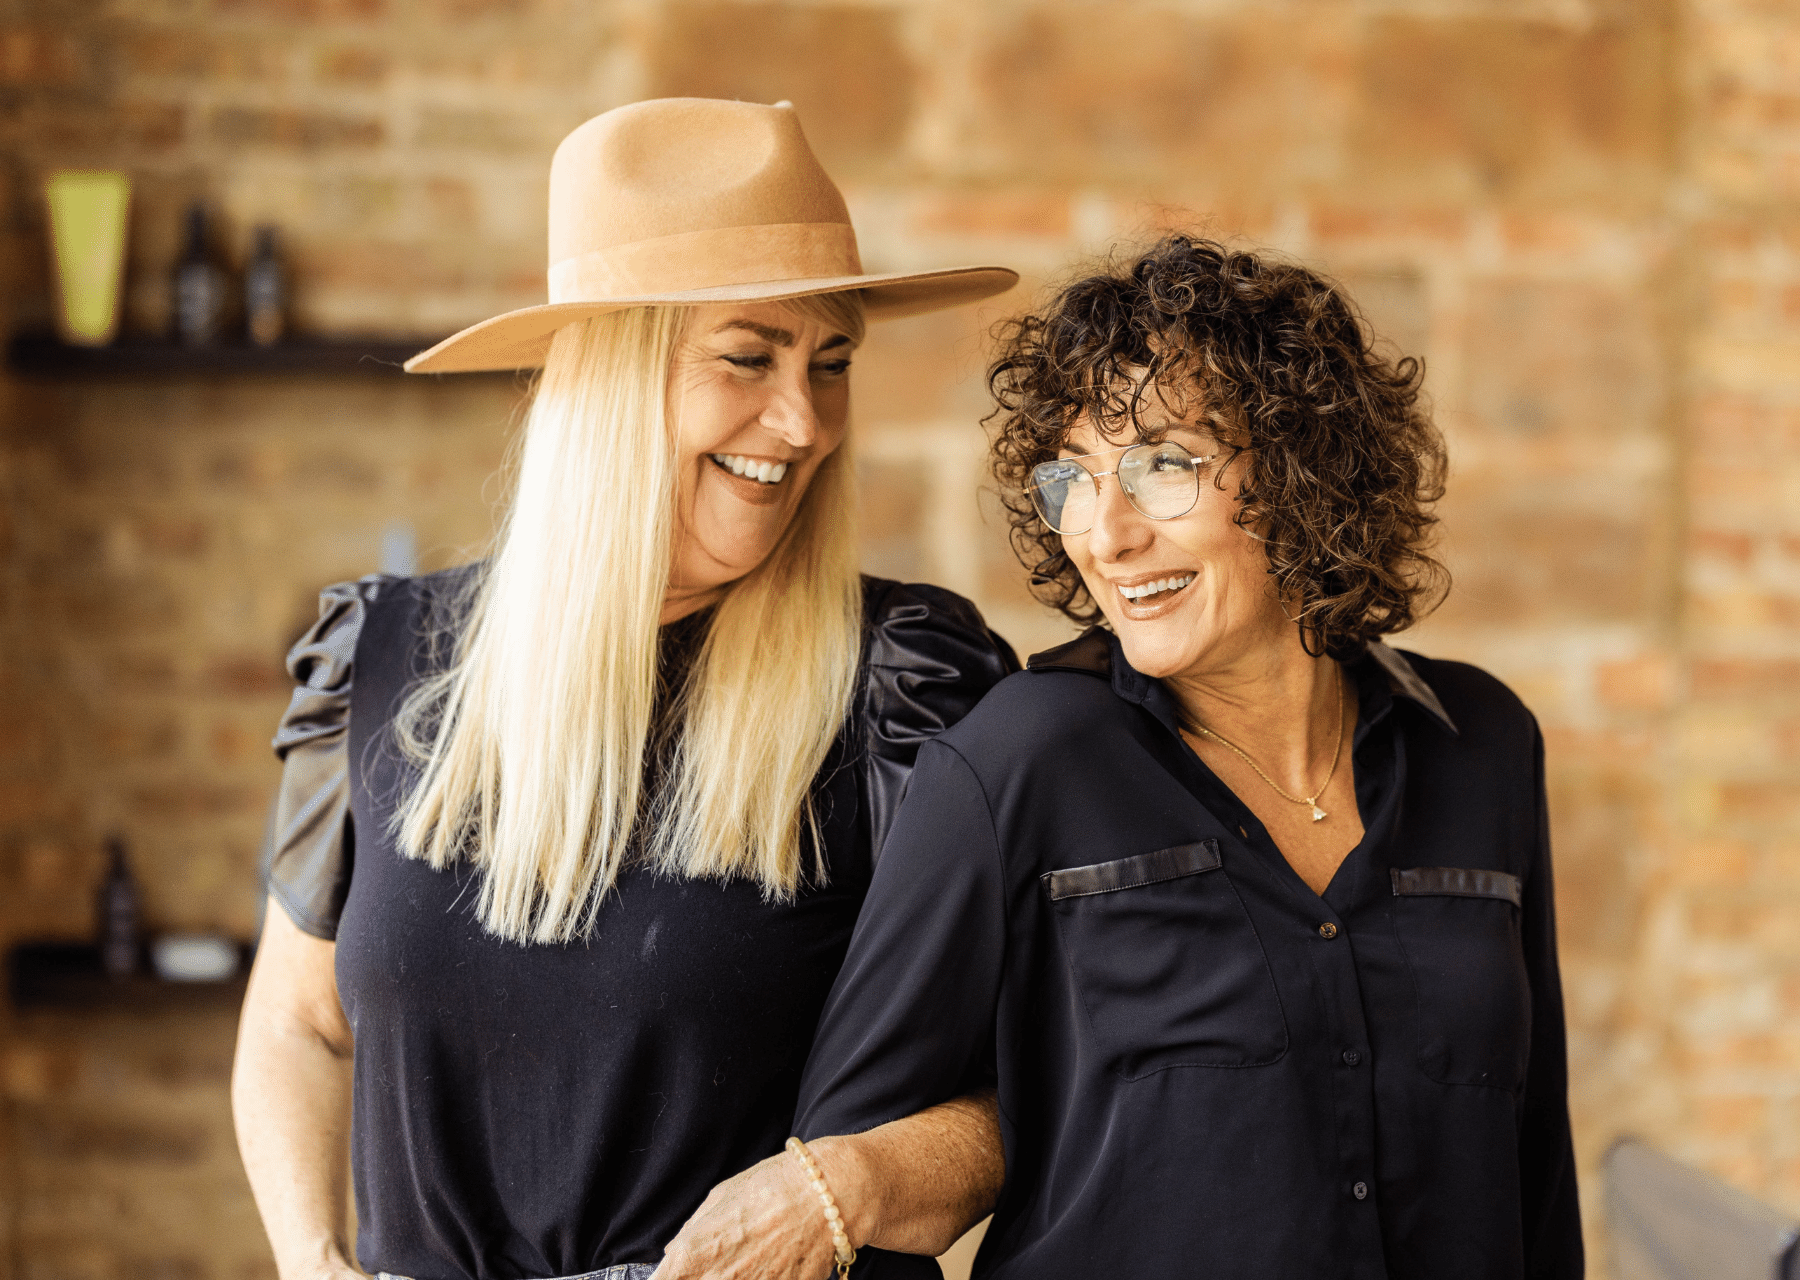 A long-haired, blonde woman in a wide-brimmed hat linking arms with a brunette, curly-haired wmoman, both smiling and mid-laughter